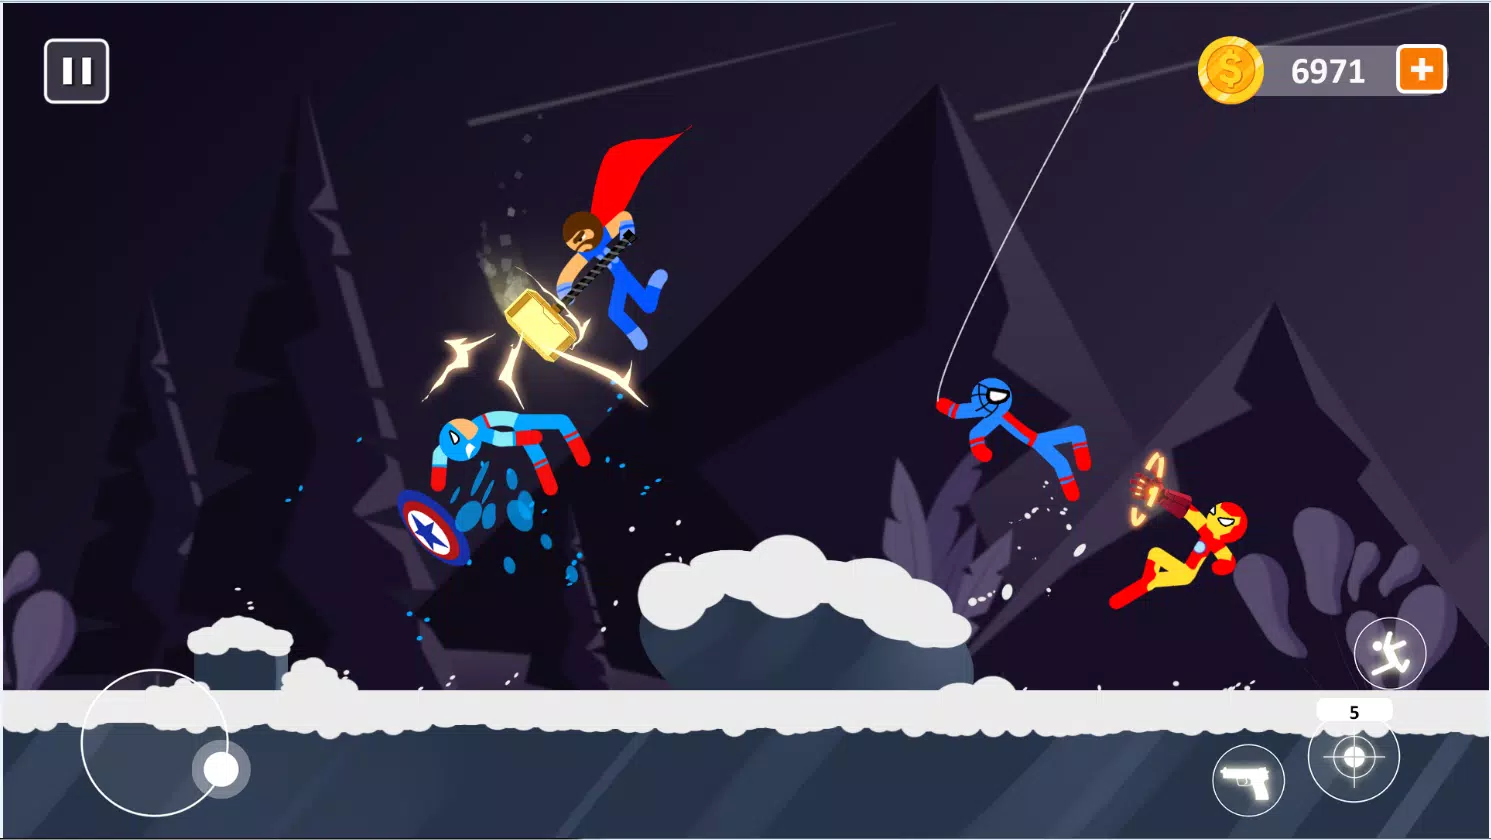 Spider Stick Fight - Supreme Stickman Fighting Game for Android